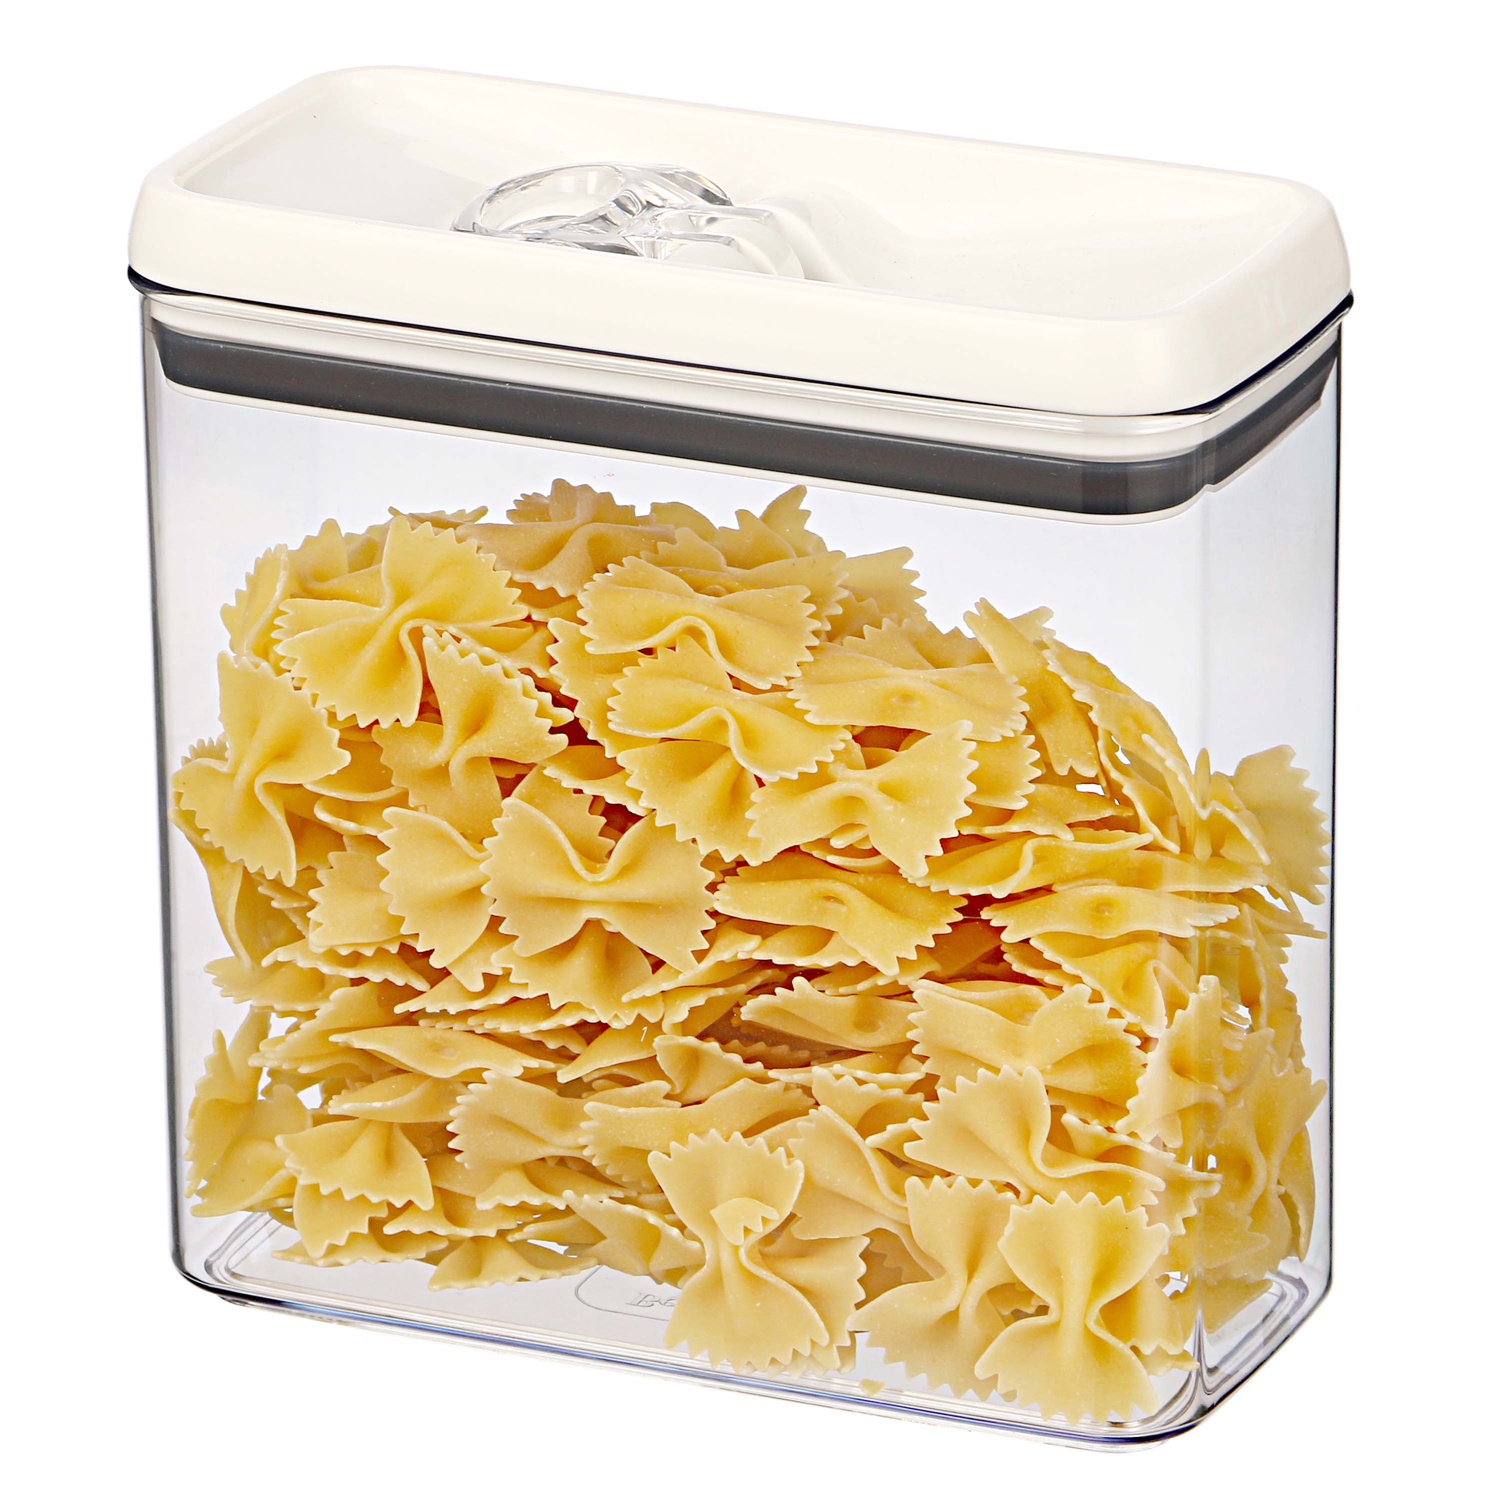 Better Homes & Gardens Canister - 11.5 Cup Flip-Tite Rectangular Food Storage Container - image 3 of 5